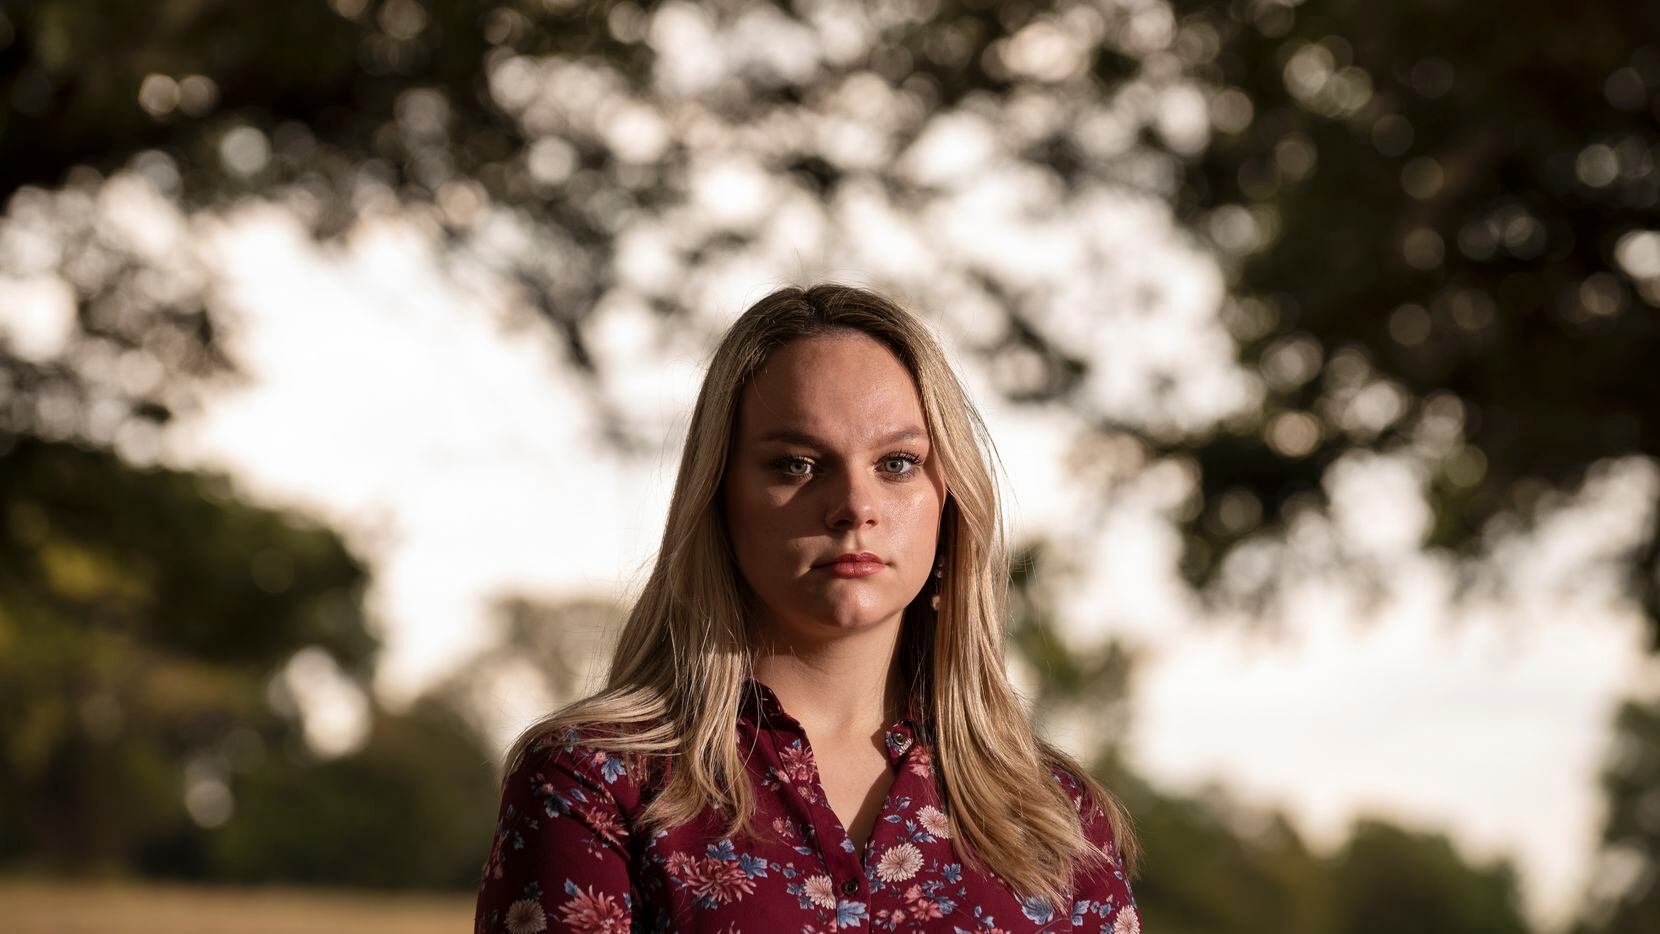 Sara Hatcher, 22, of Dallas is dealing with long-term COVID-19 effects after having...